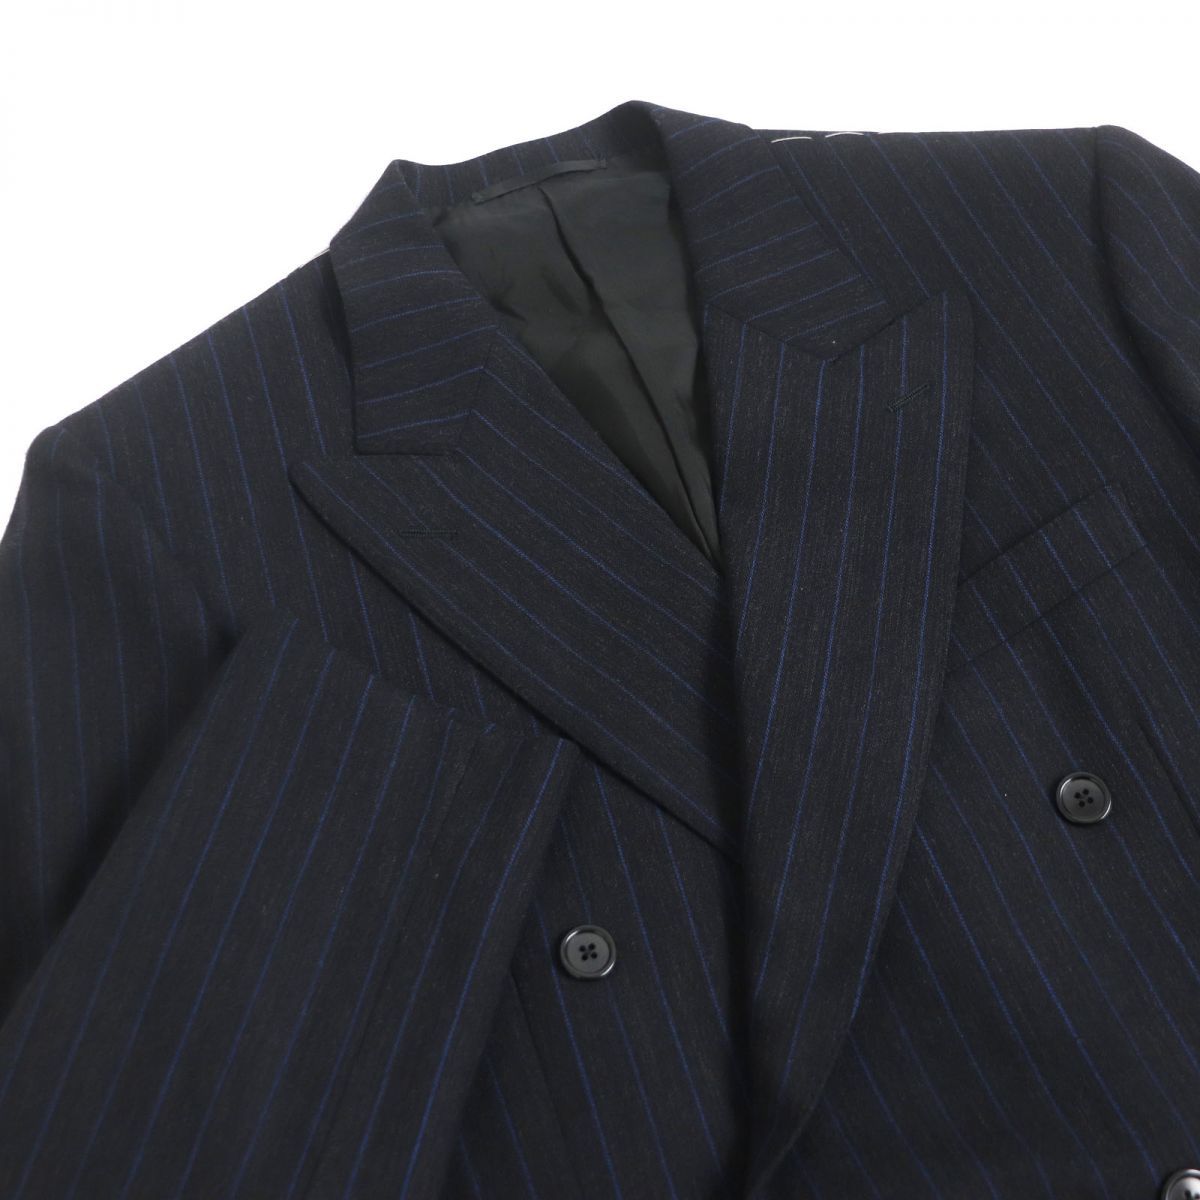 [ Don Don review ] unused goods *Santoni/ sun to-ni stripe pattern wool 100% double-breasted suit top and bottom setup black × blue 48 men's 